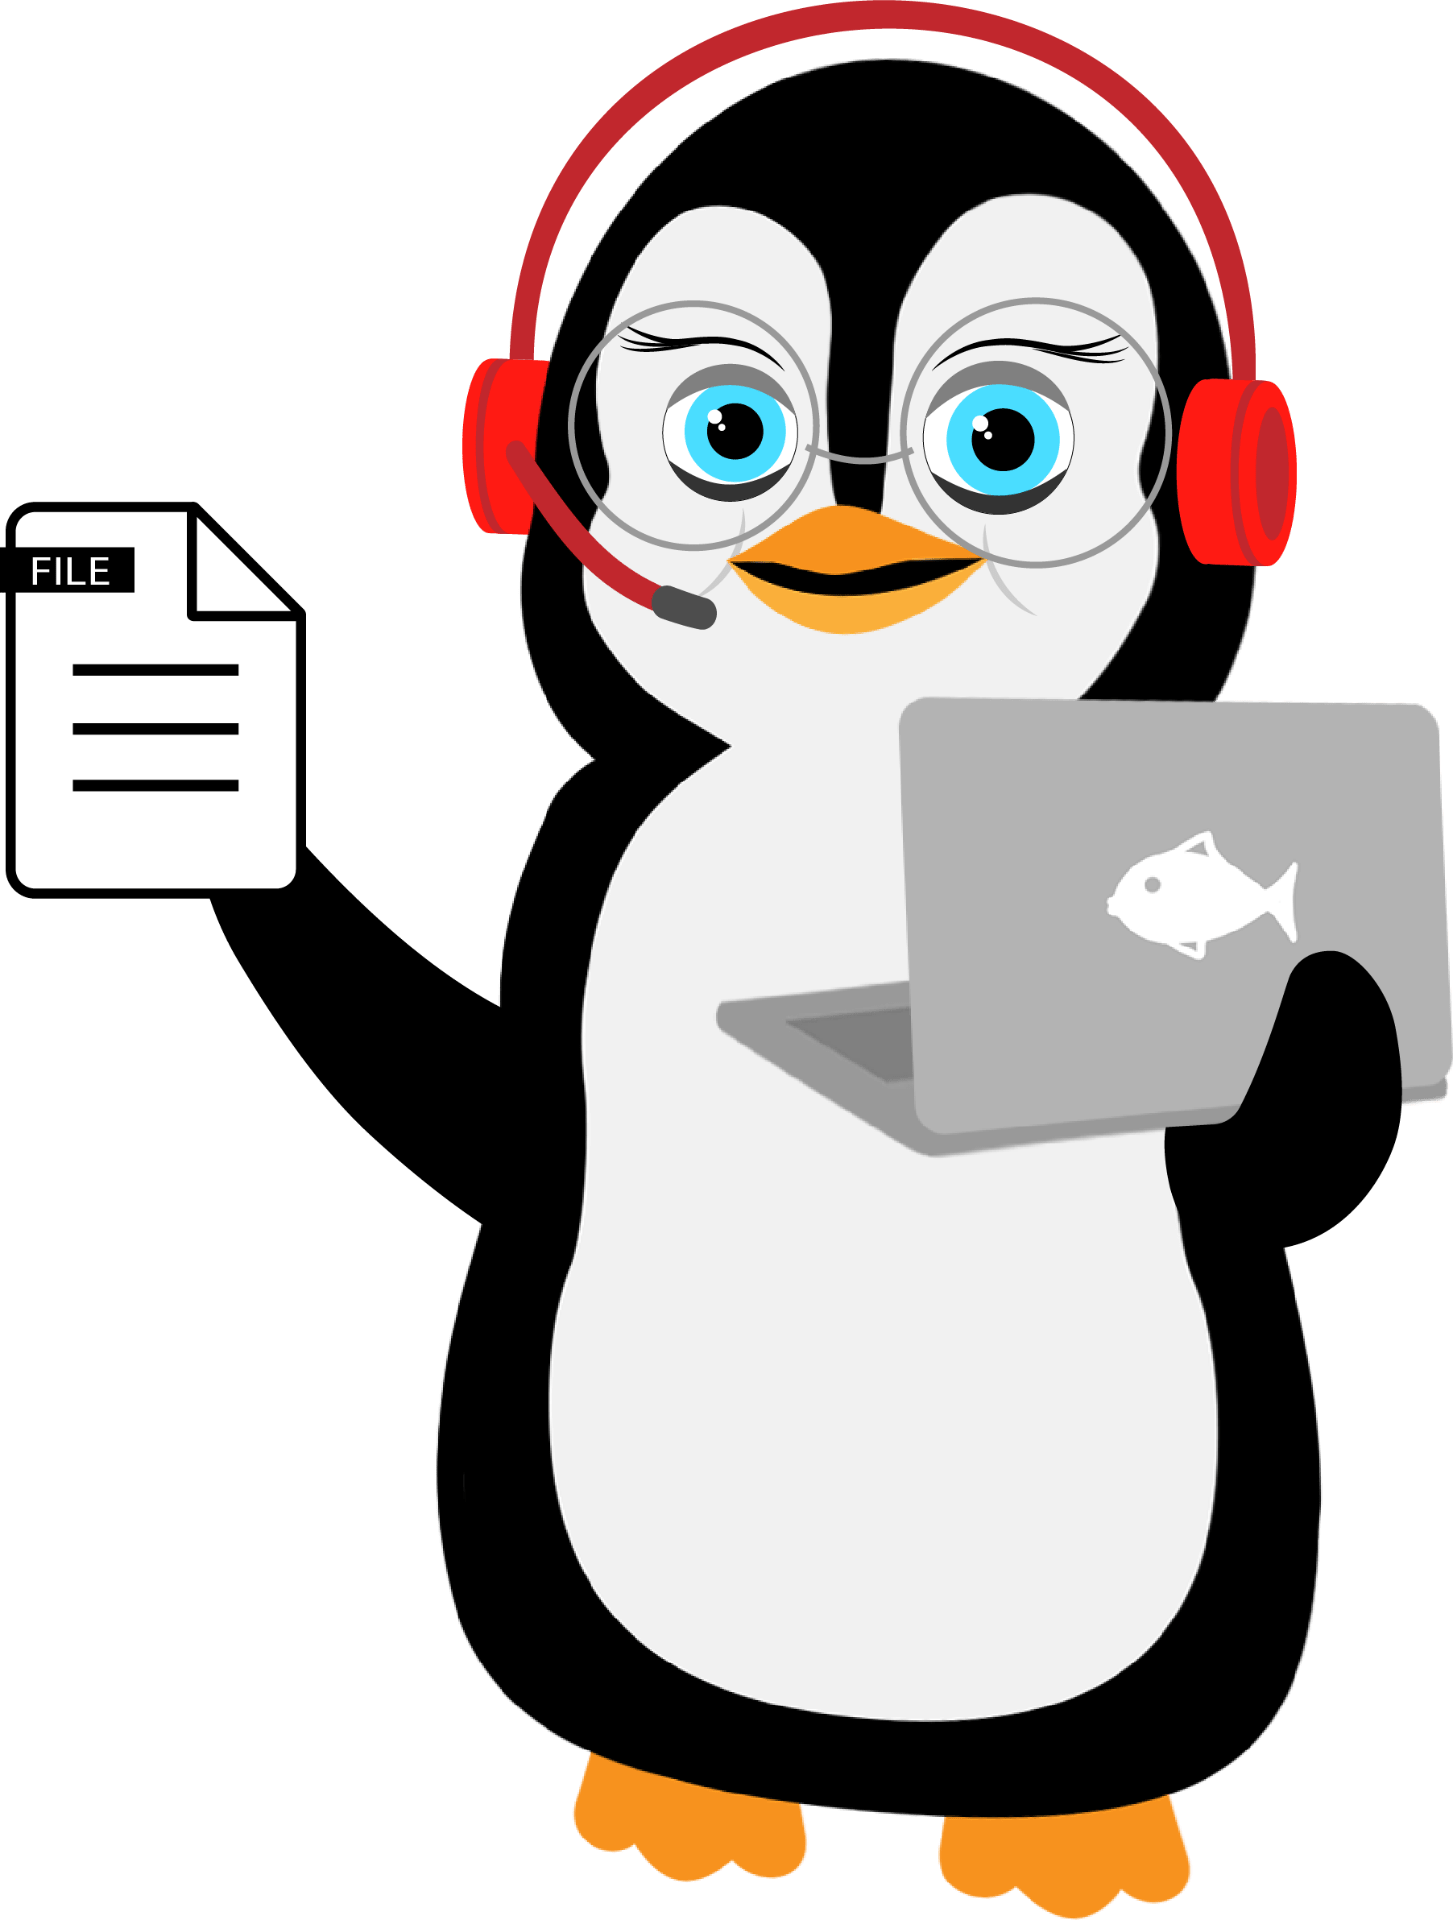 A penguin with headset and monitor holding a file icon